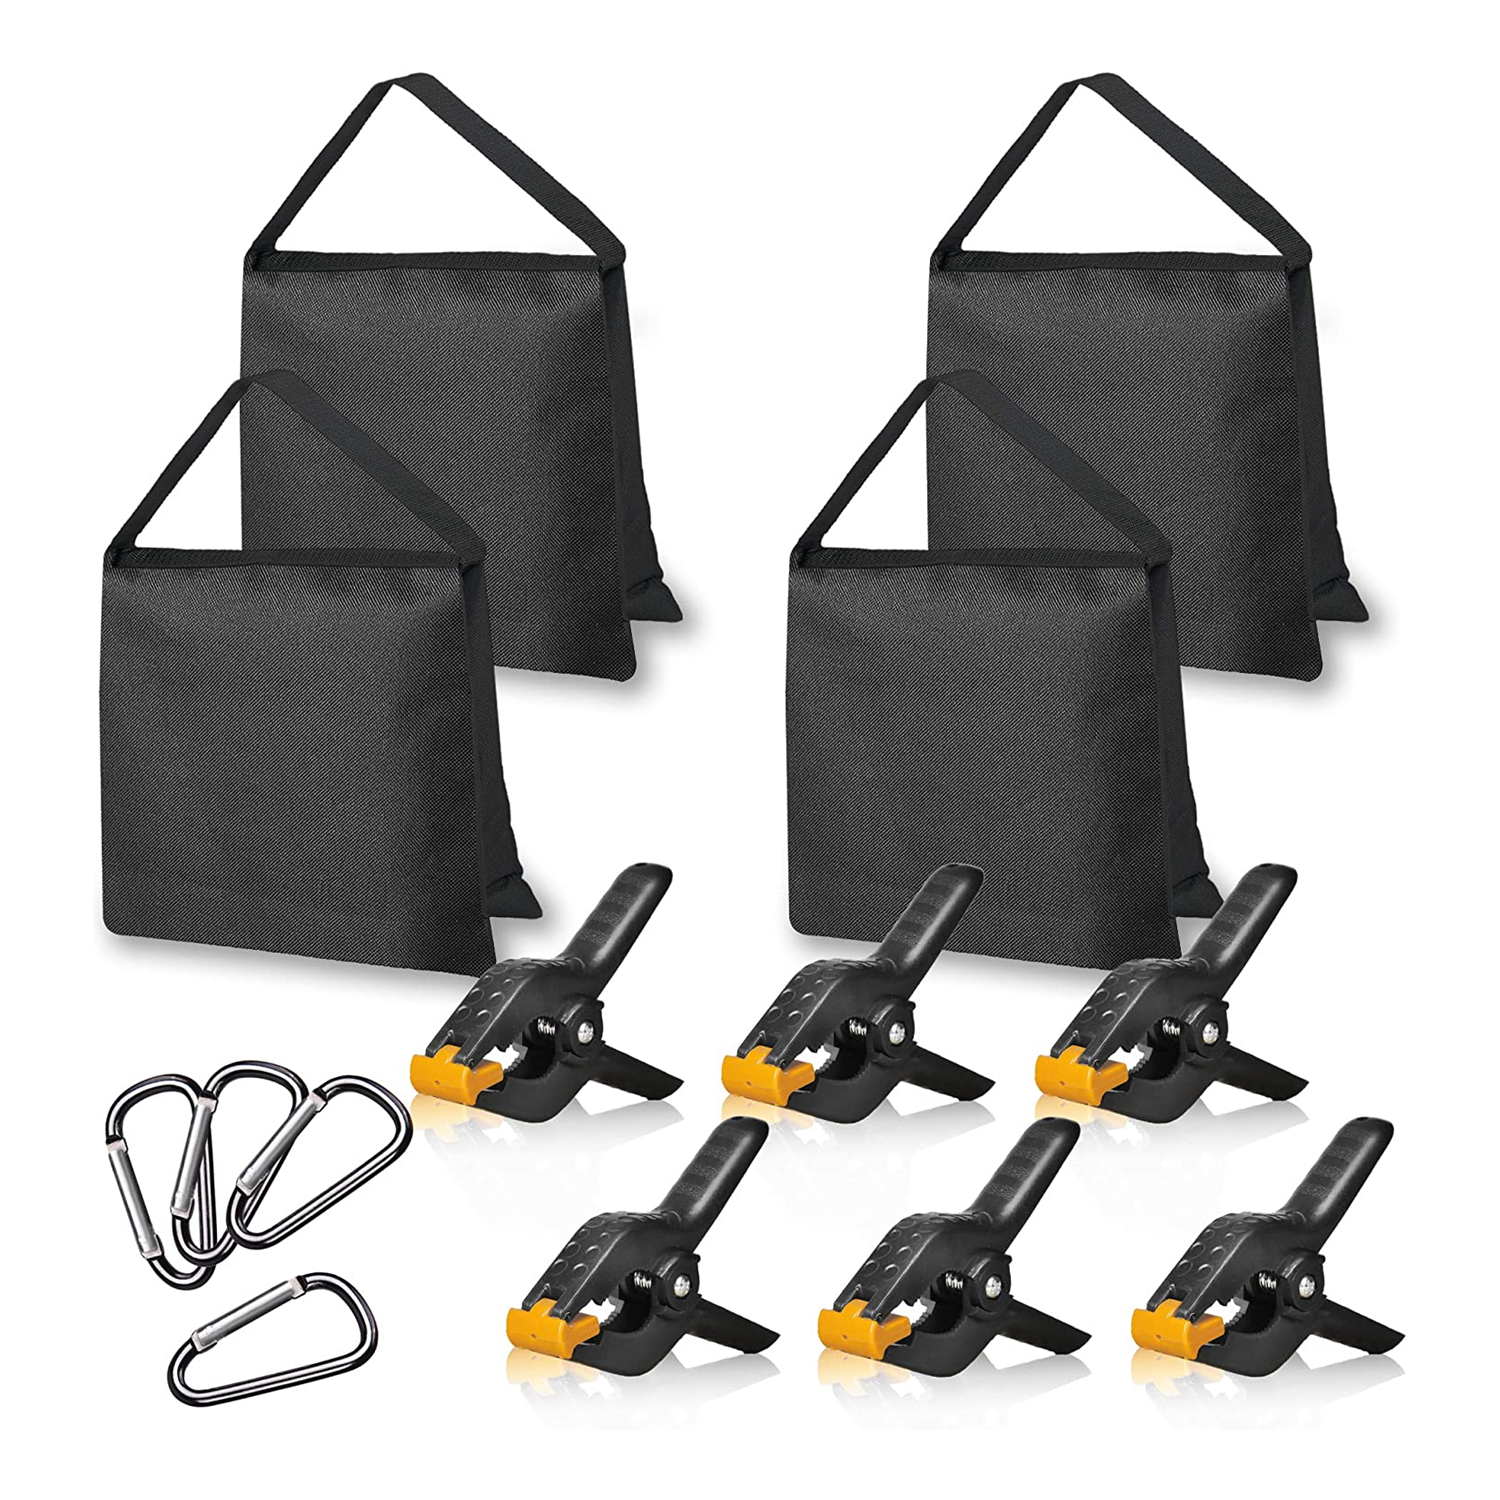 4 Packs of Heavy Duty Sandbag and 6 Packs of Clamps